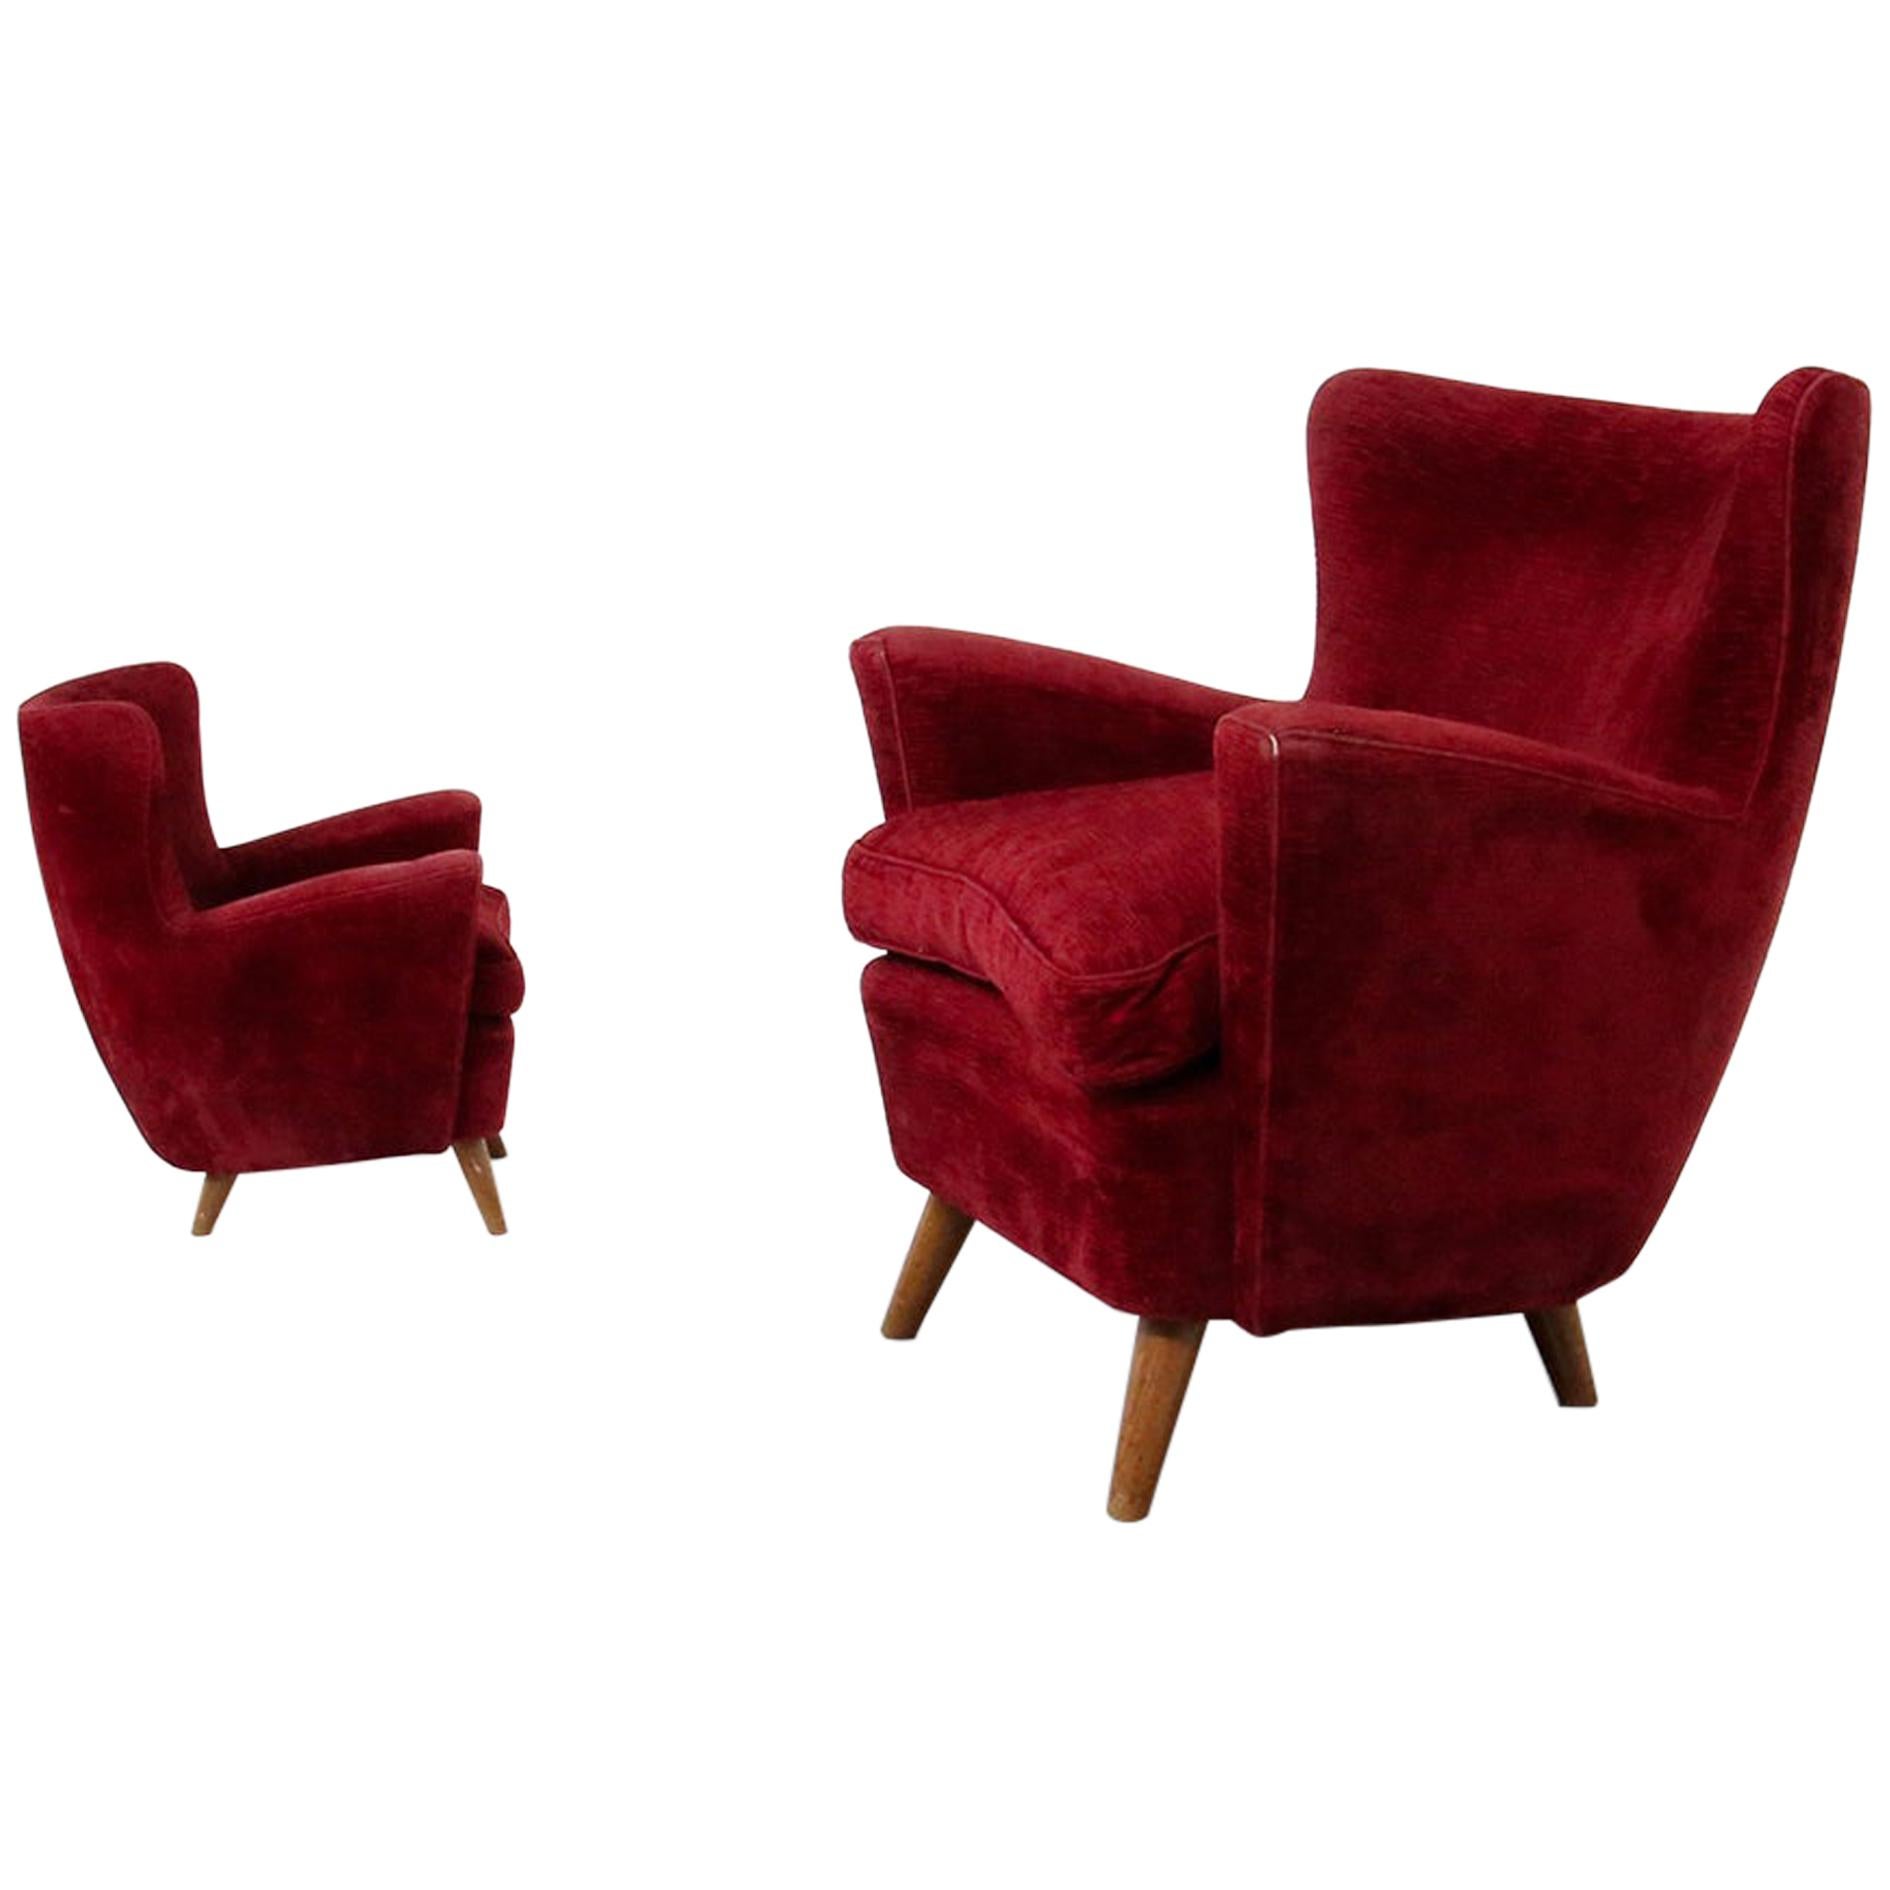 Pair of Italian Armchairs Attributed to Melchiorre Bega in Bordeaux Velvet, 1950